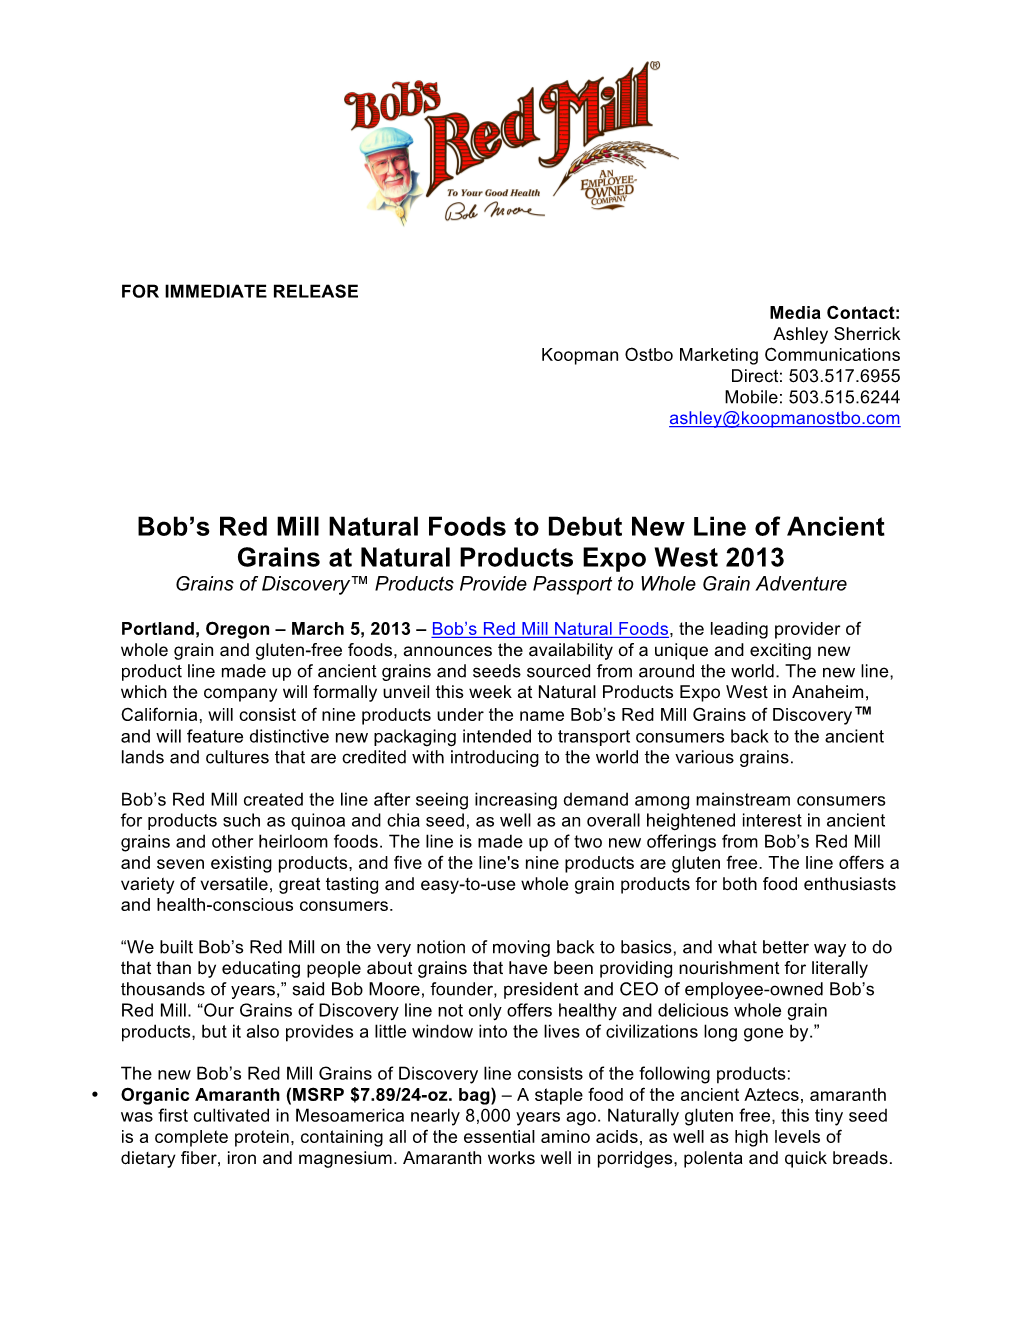 Bob's Red Mill Natural Foods to Debut New Line of Ancient Grains At